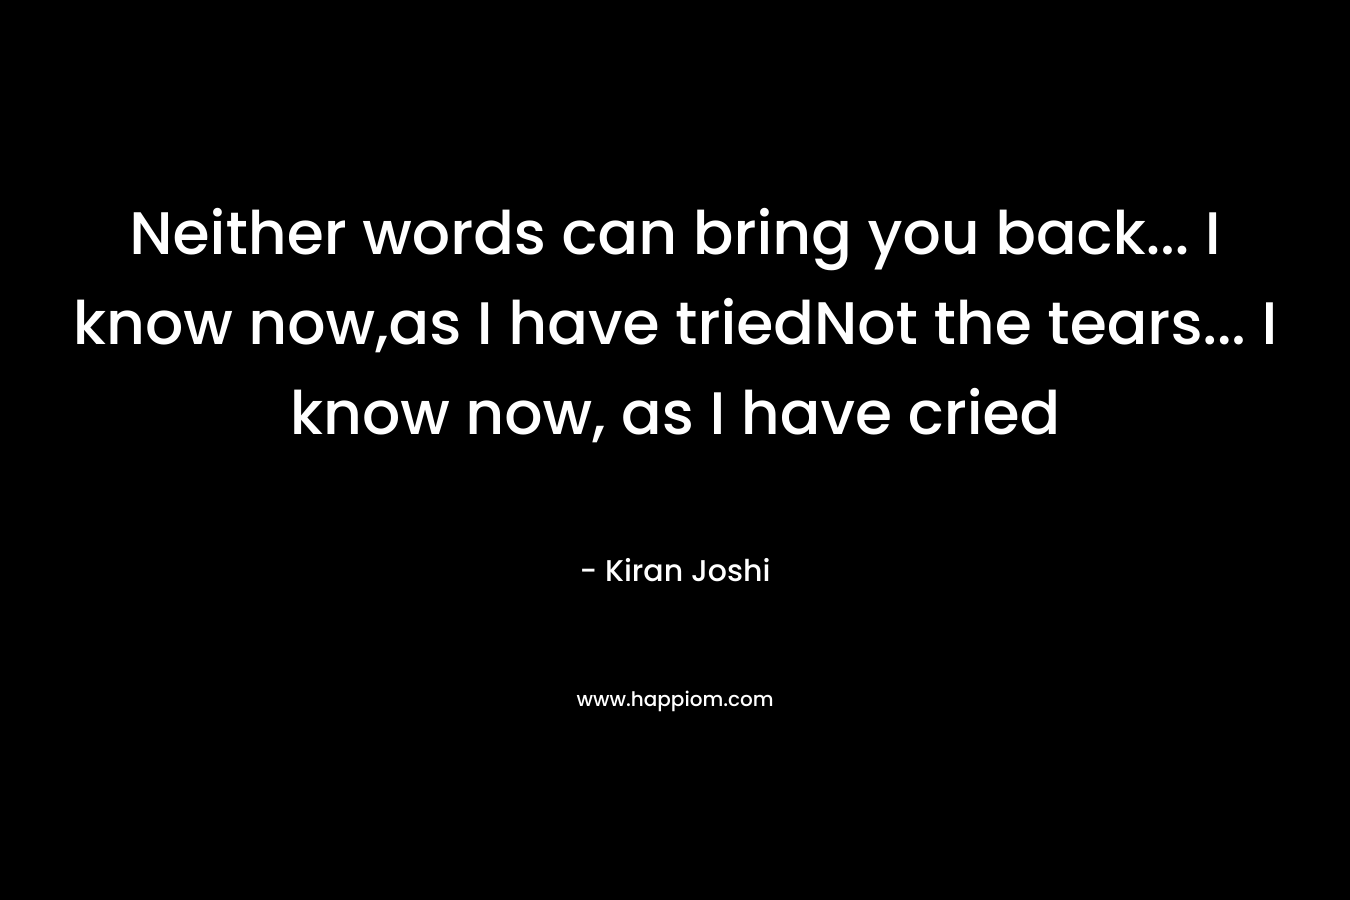 Neither words can bring you back... I know now,as I have triedNot the tears... I know now, as I have cried